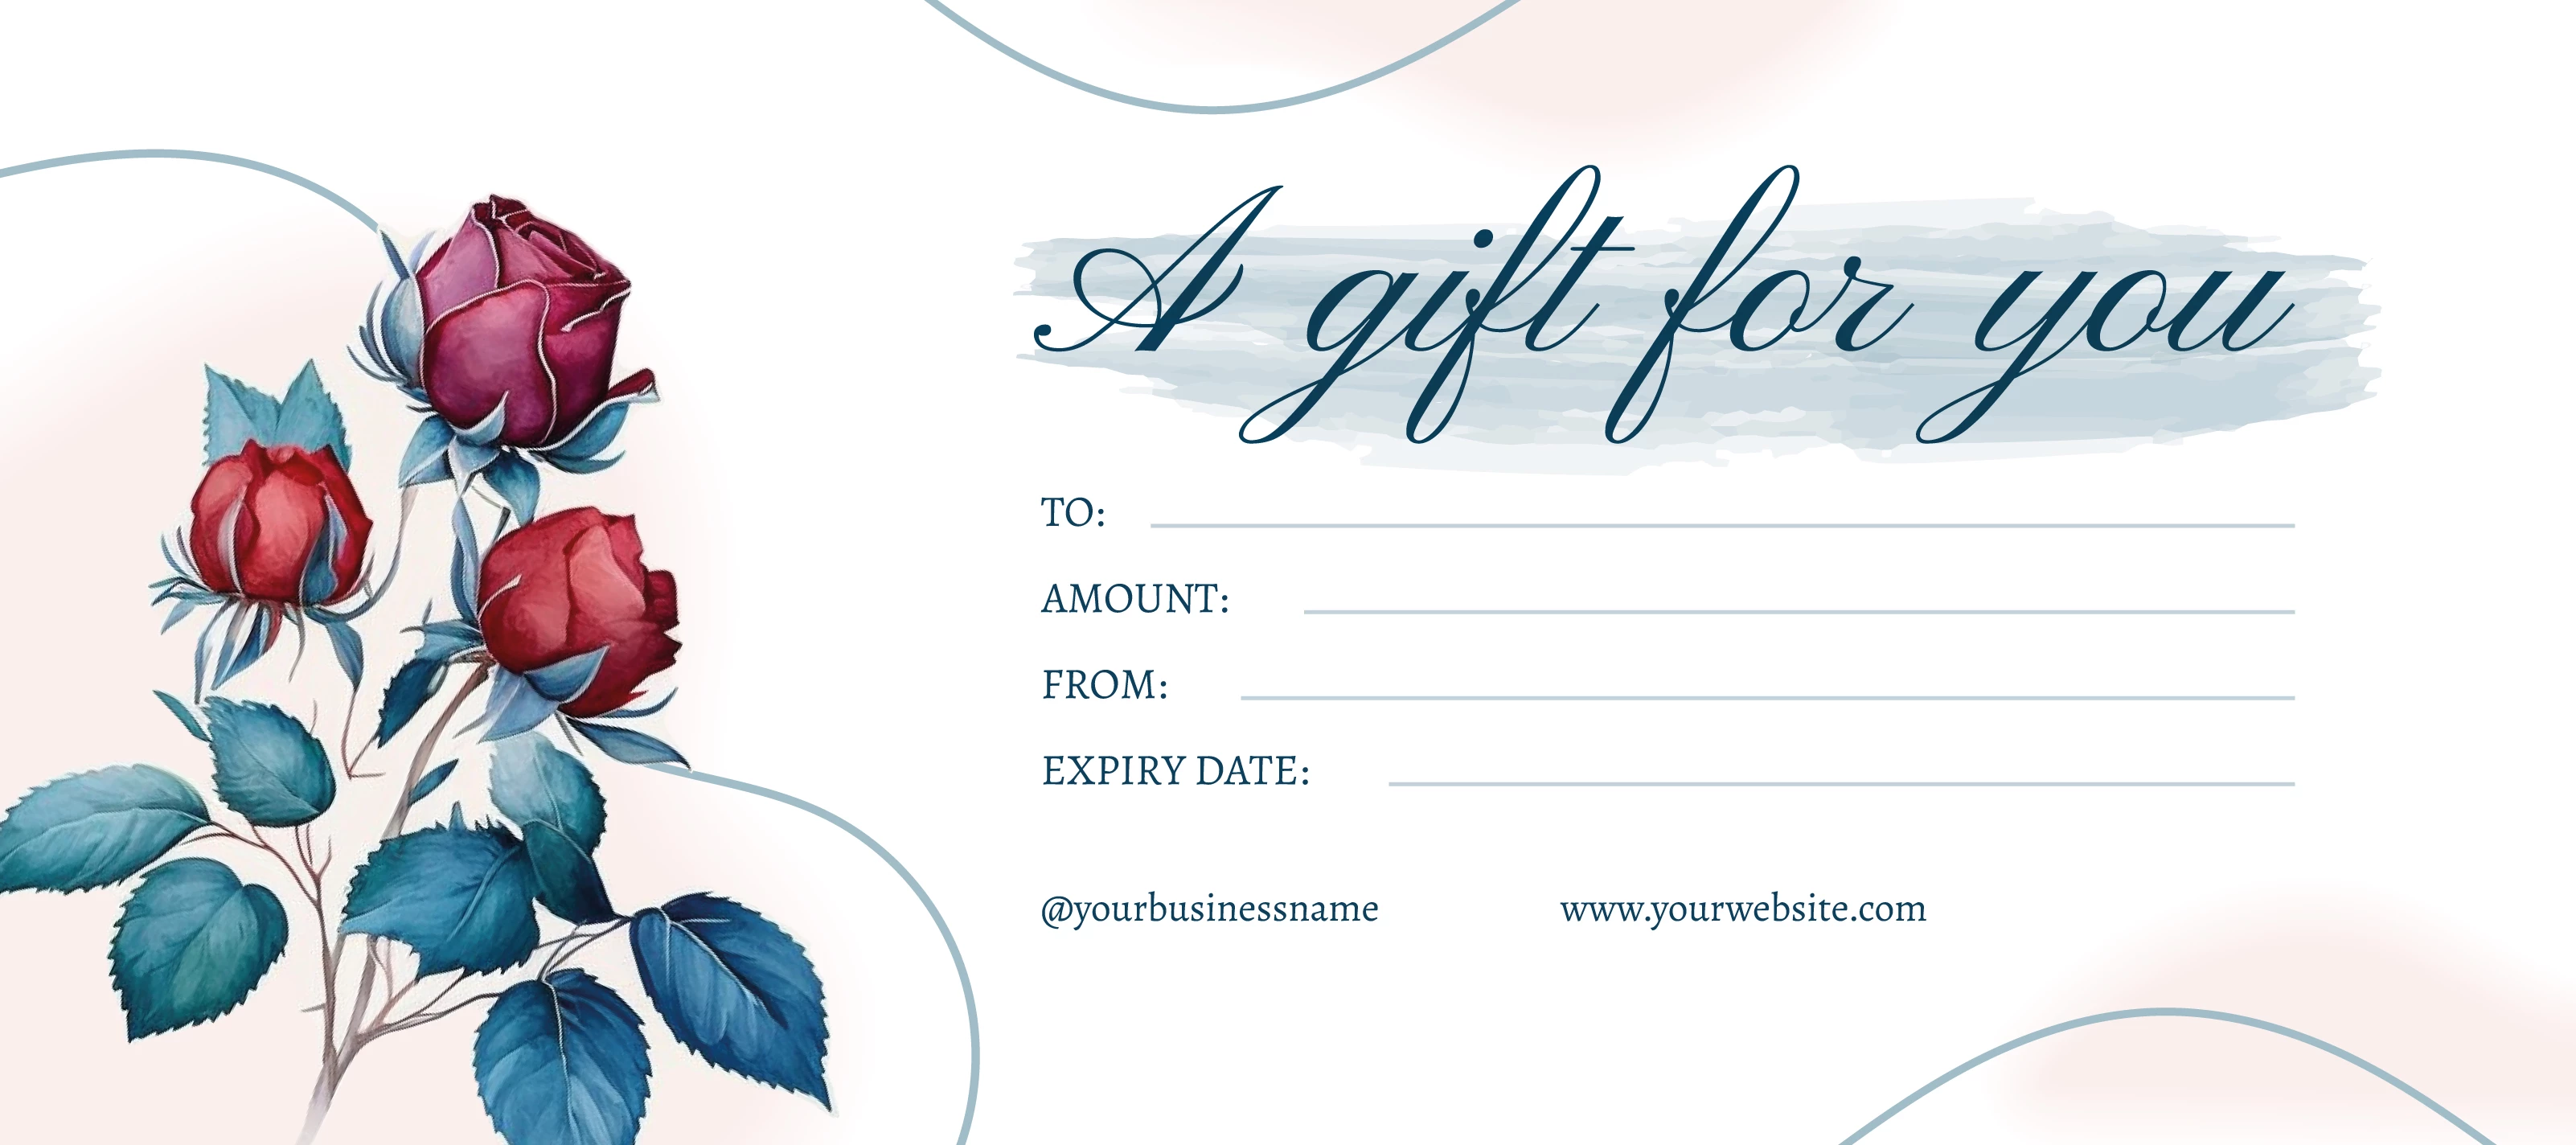 restaurant gift certificate template free download